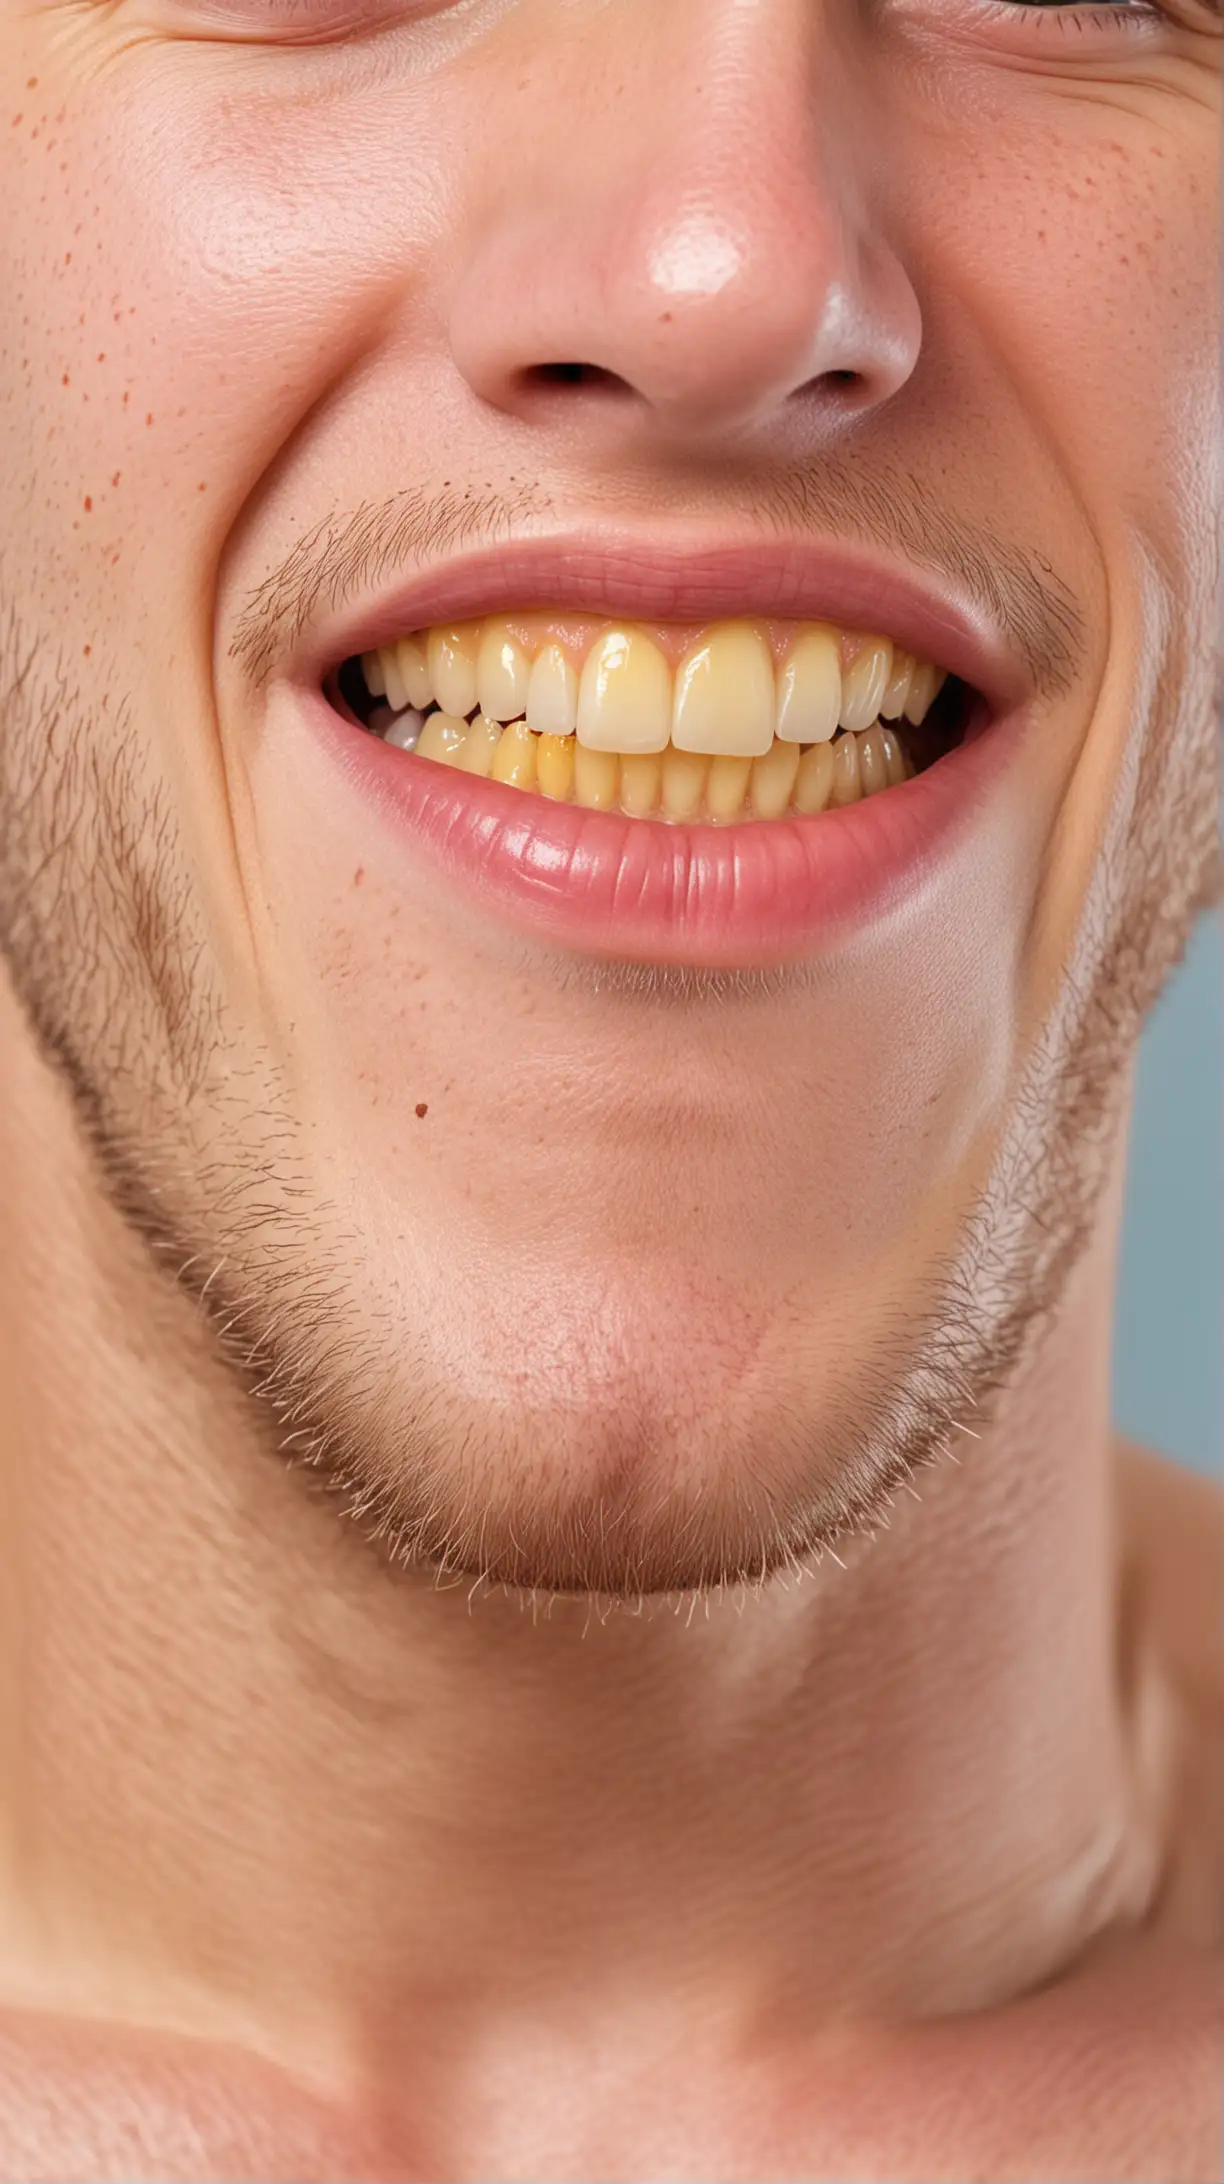 Young Man with a Severely Decayed Tooth